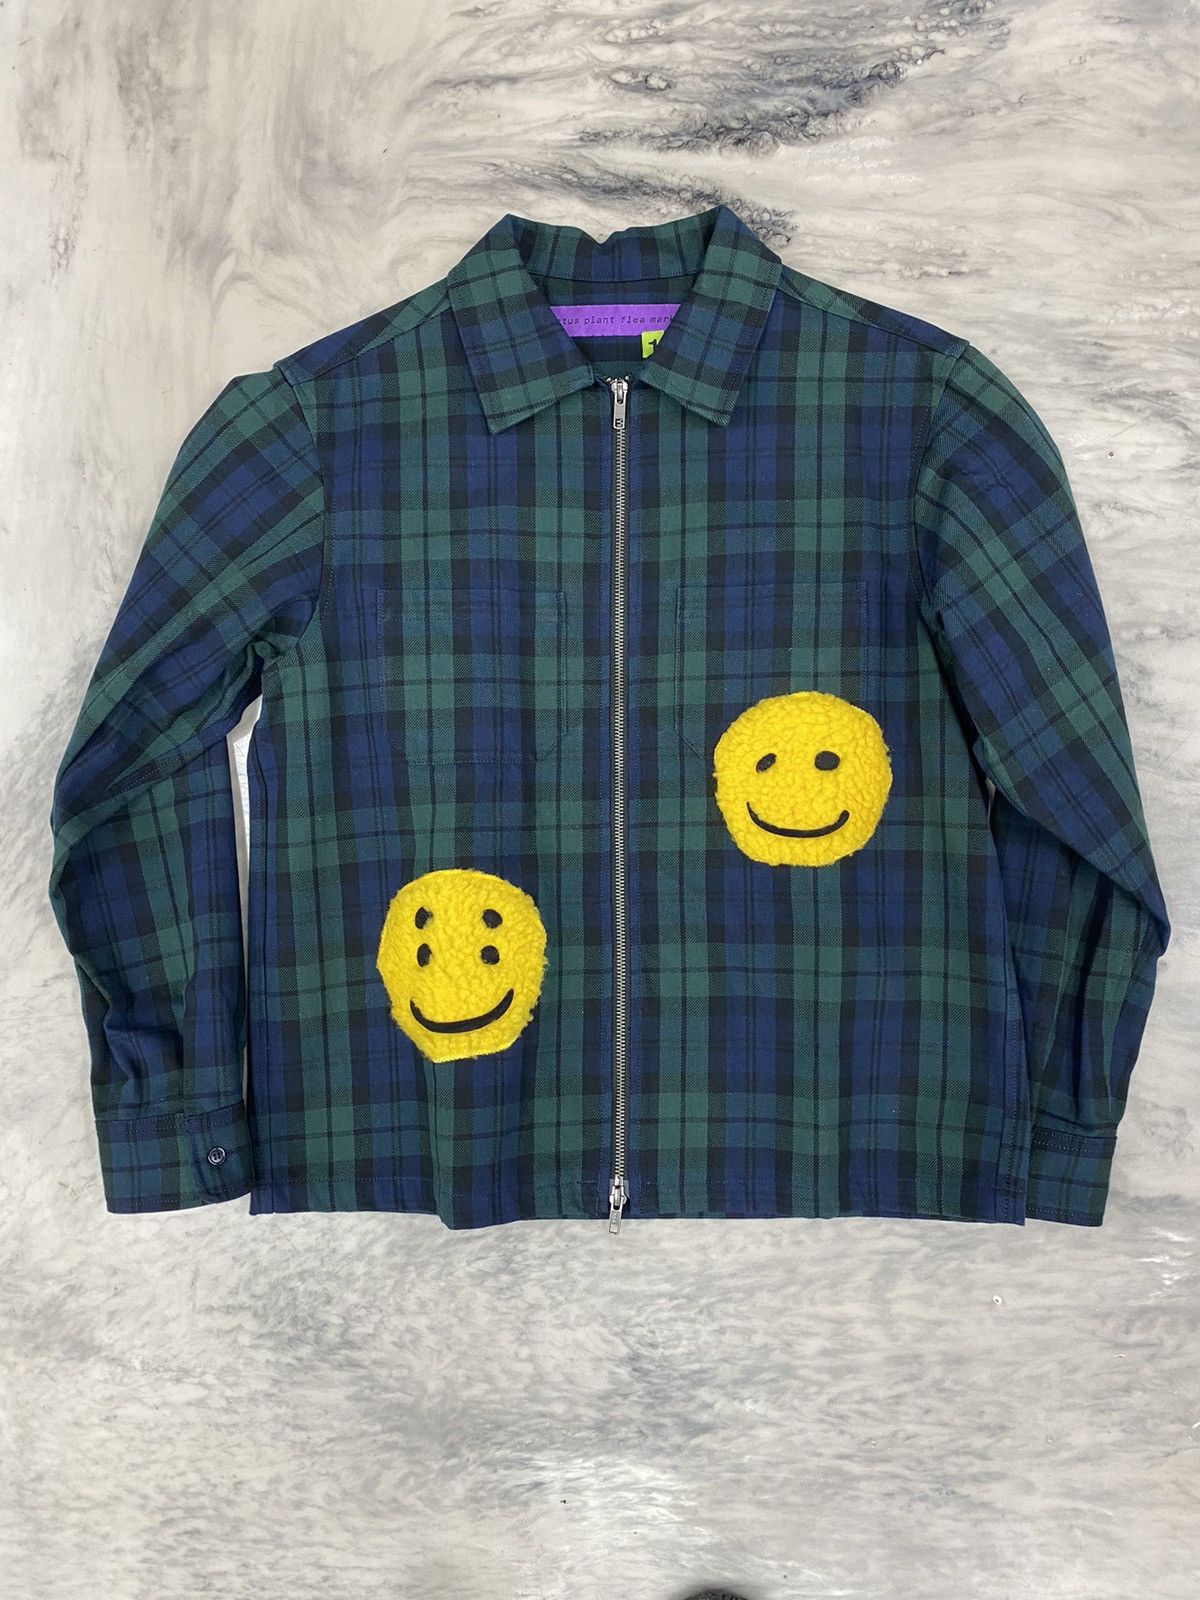 Cactus Plant Flea Market Cactus plant flea market check zip up plaid work  jacket | Grailed